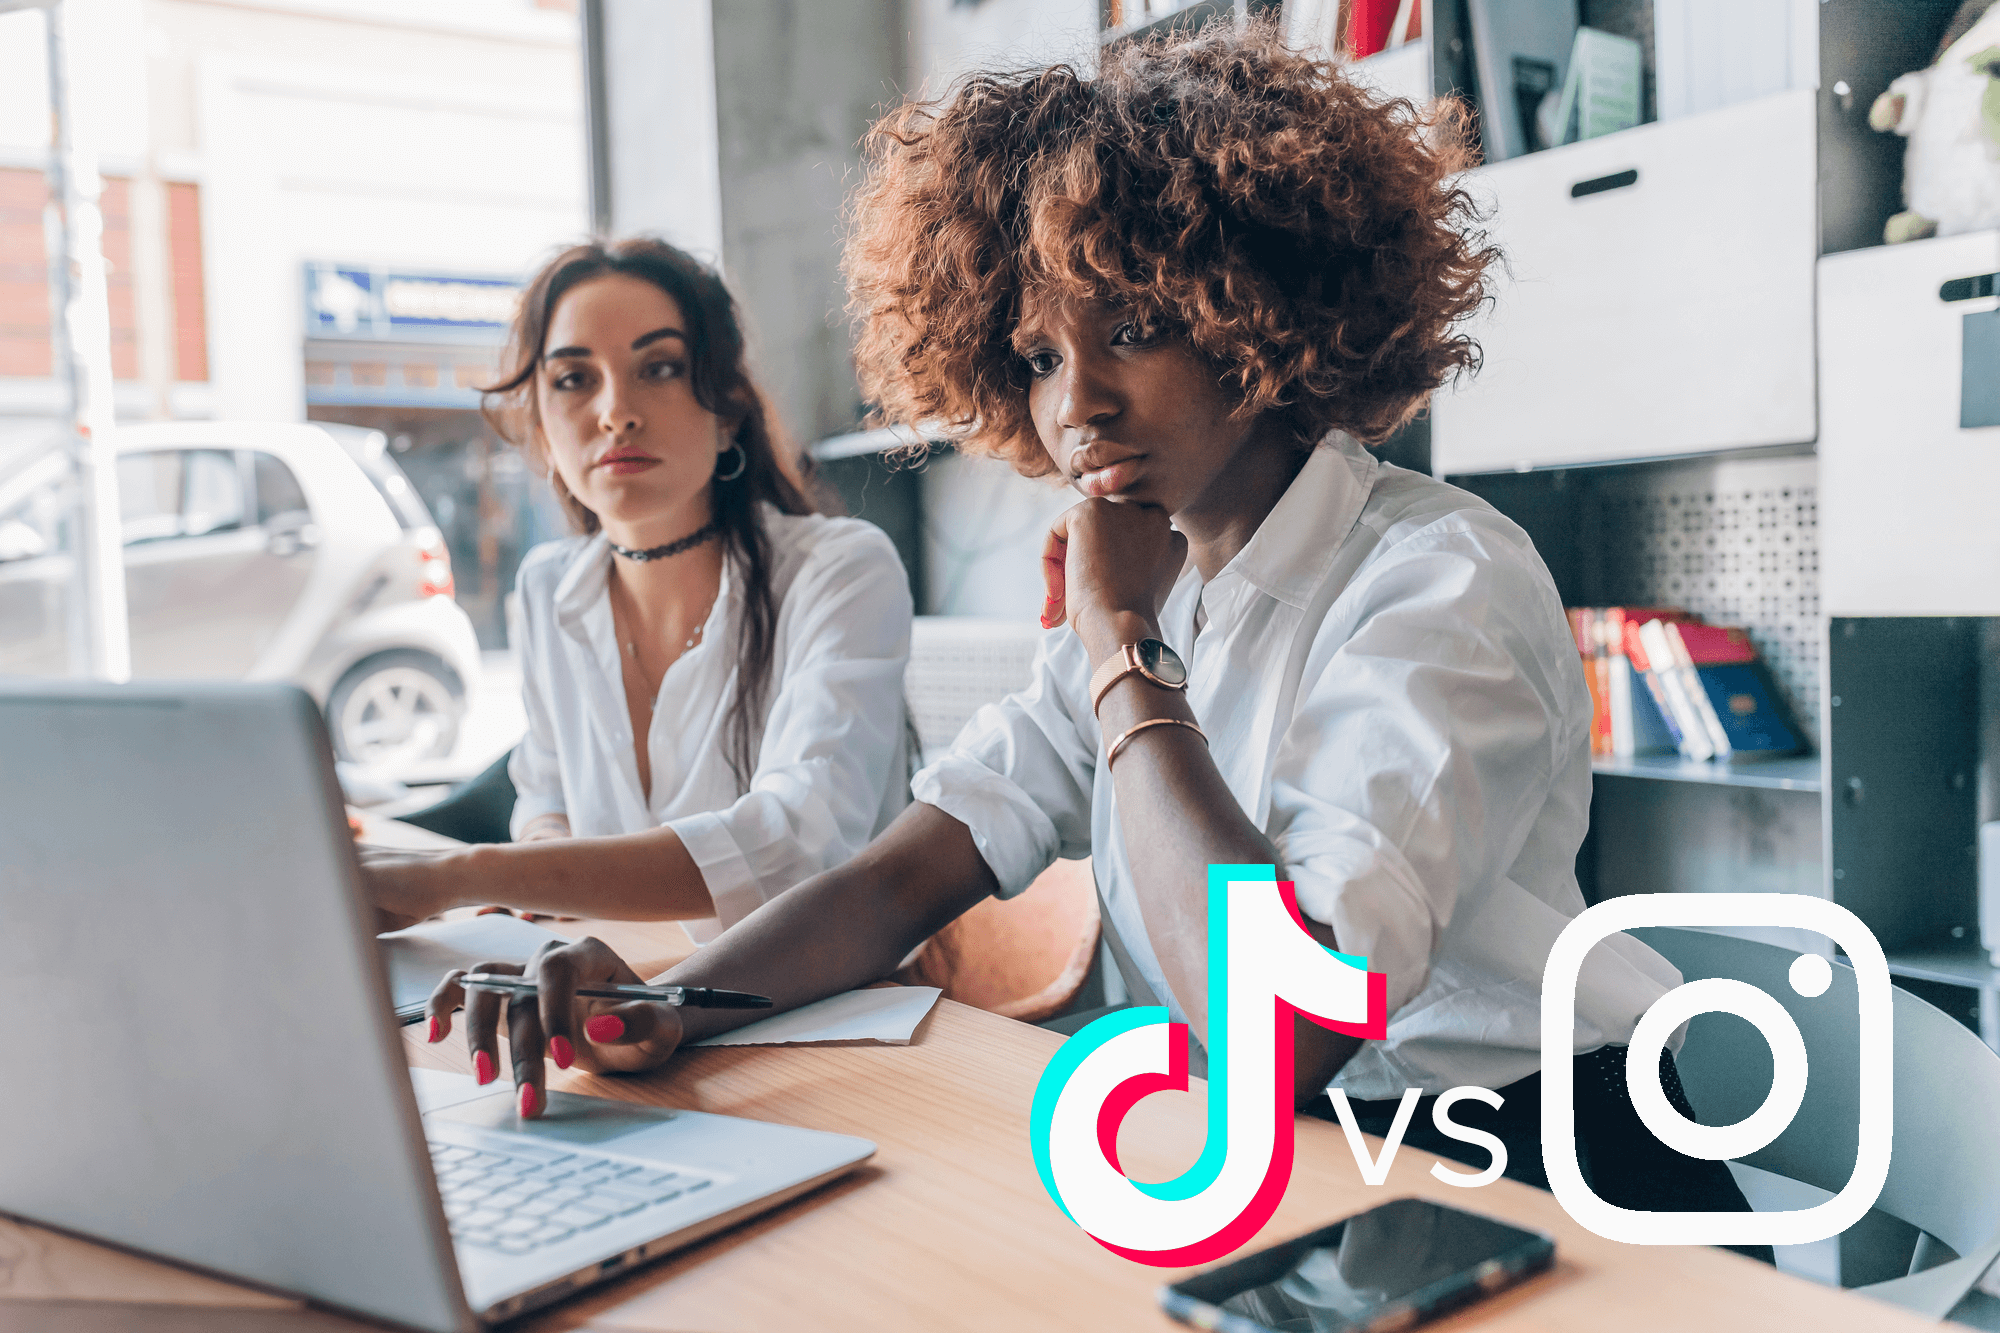 TikTok Live vs Instagram Live: Which is Better for your Personal Brand?